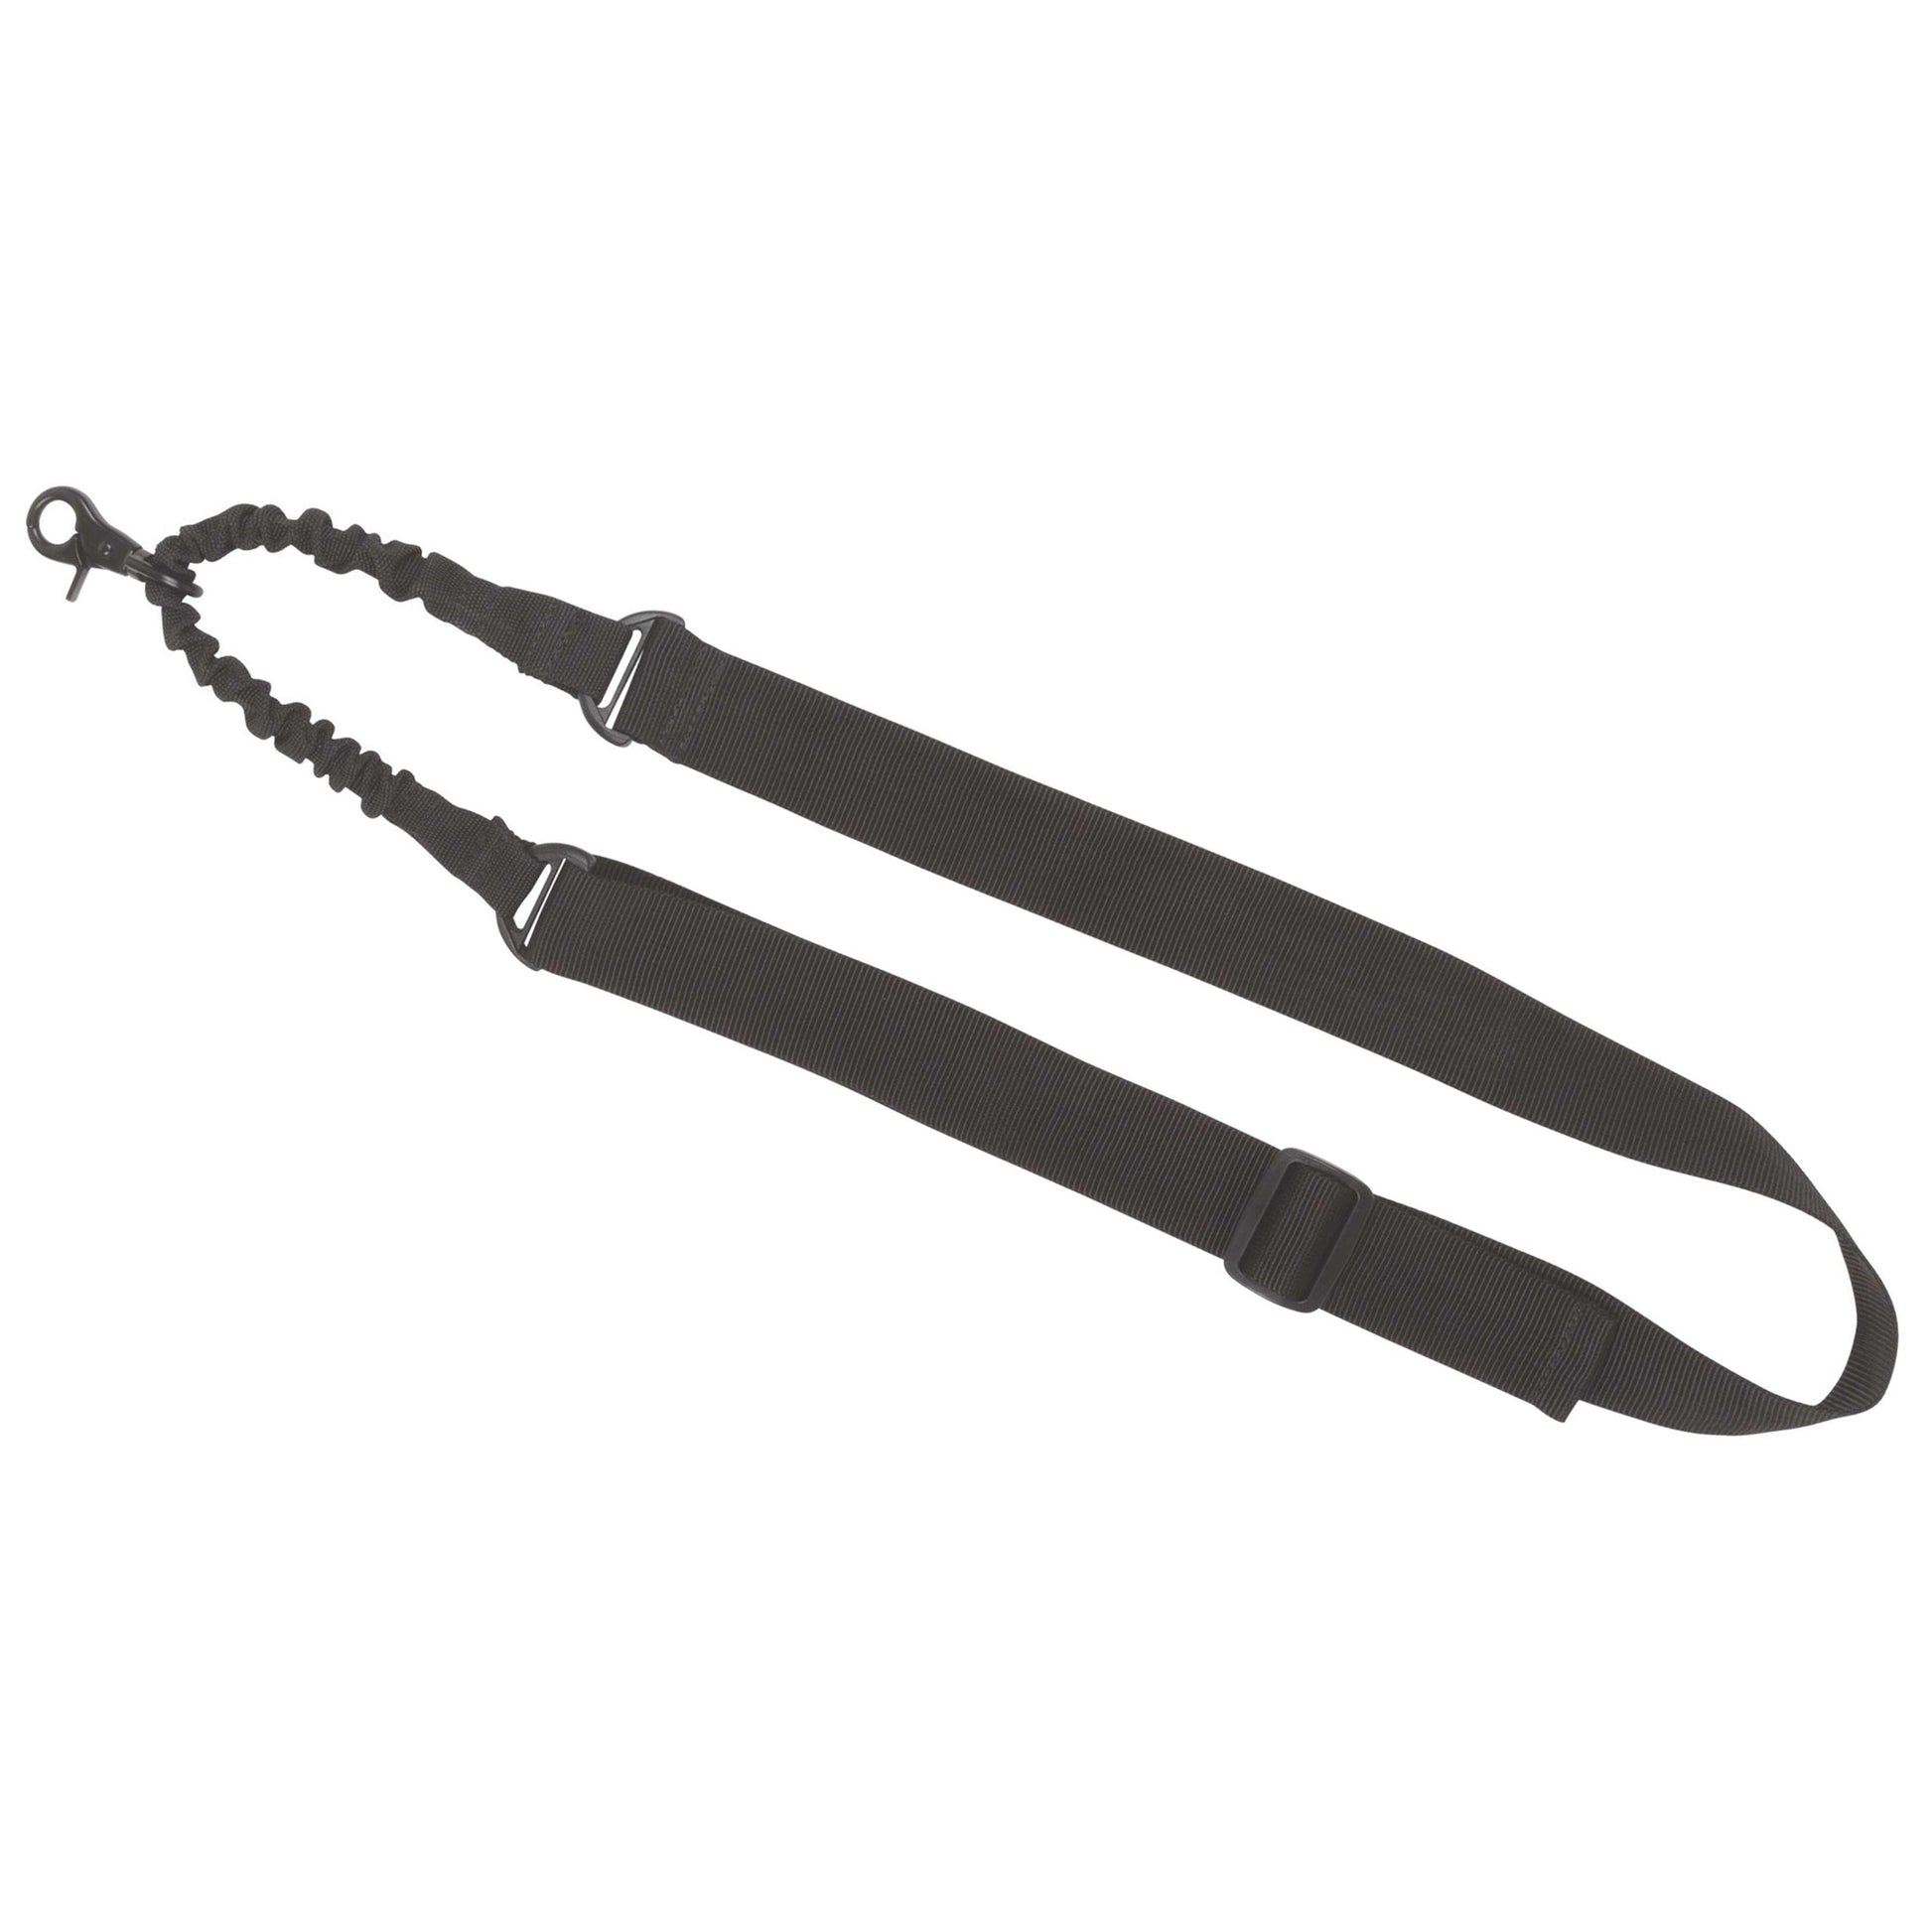 Allen Solo Single Point Sling heavy-duty 1.5" Adjusts from 42"-54" Black 8910 - California Shooting Supplies